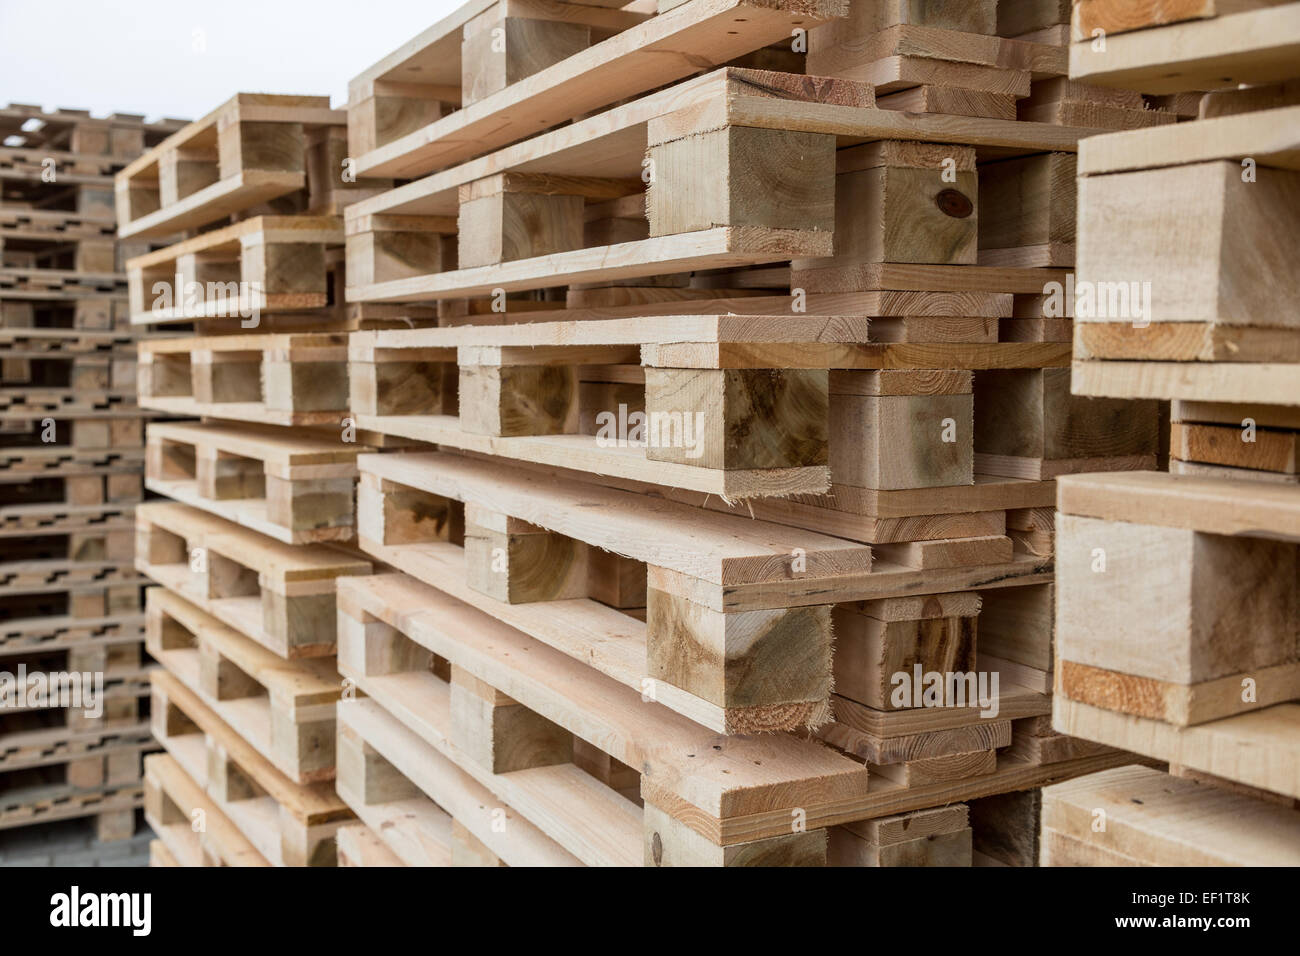 Stock Piles of wooden pallets in a yard Stock Photo